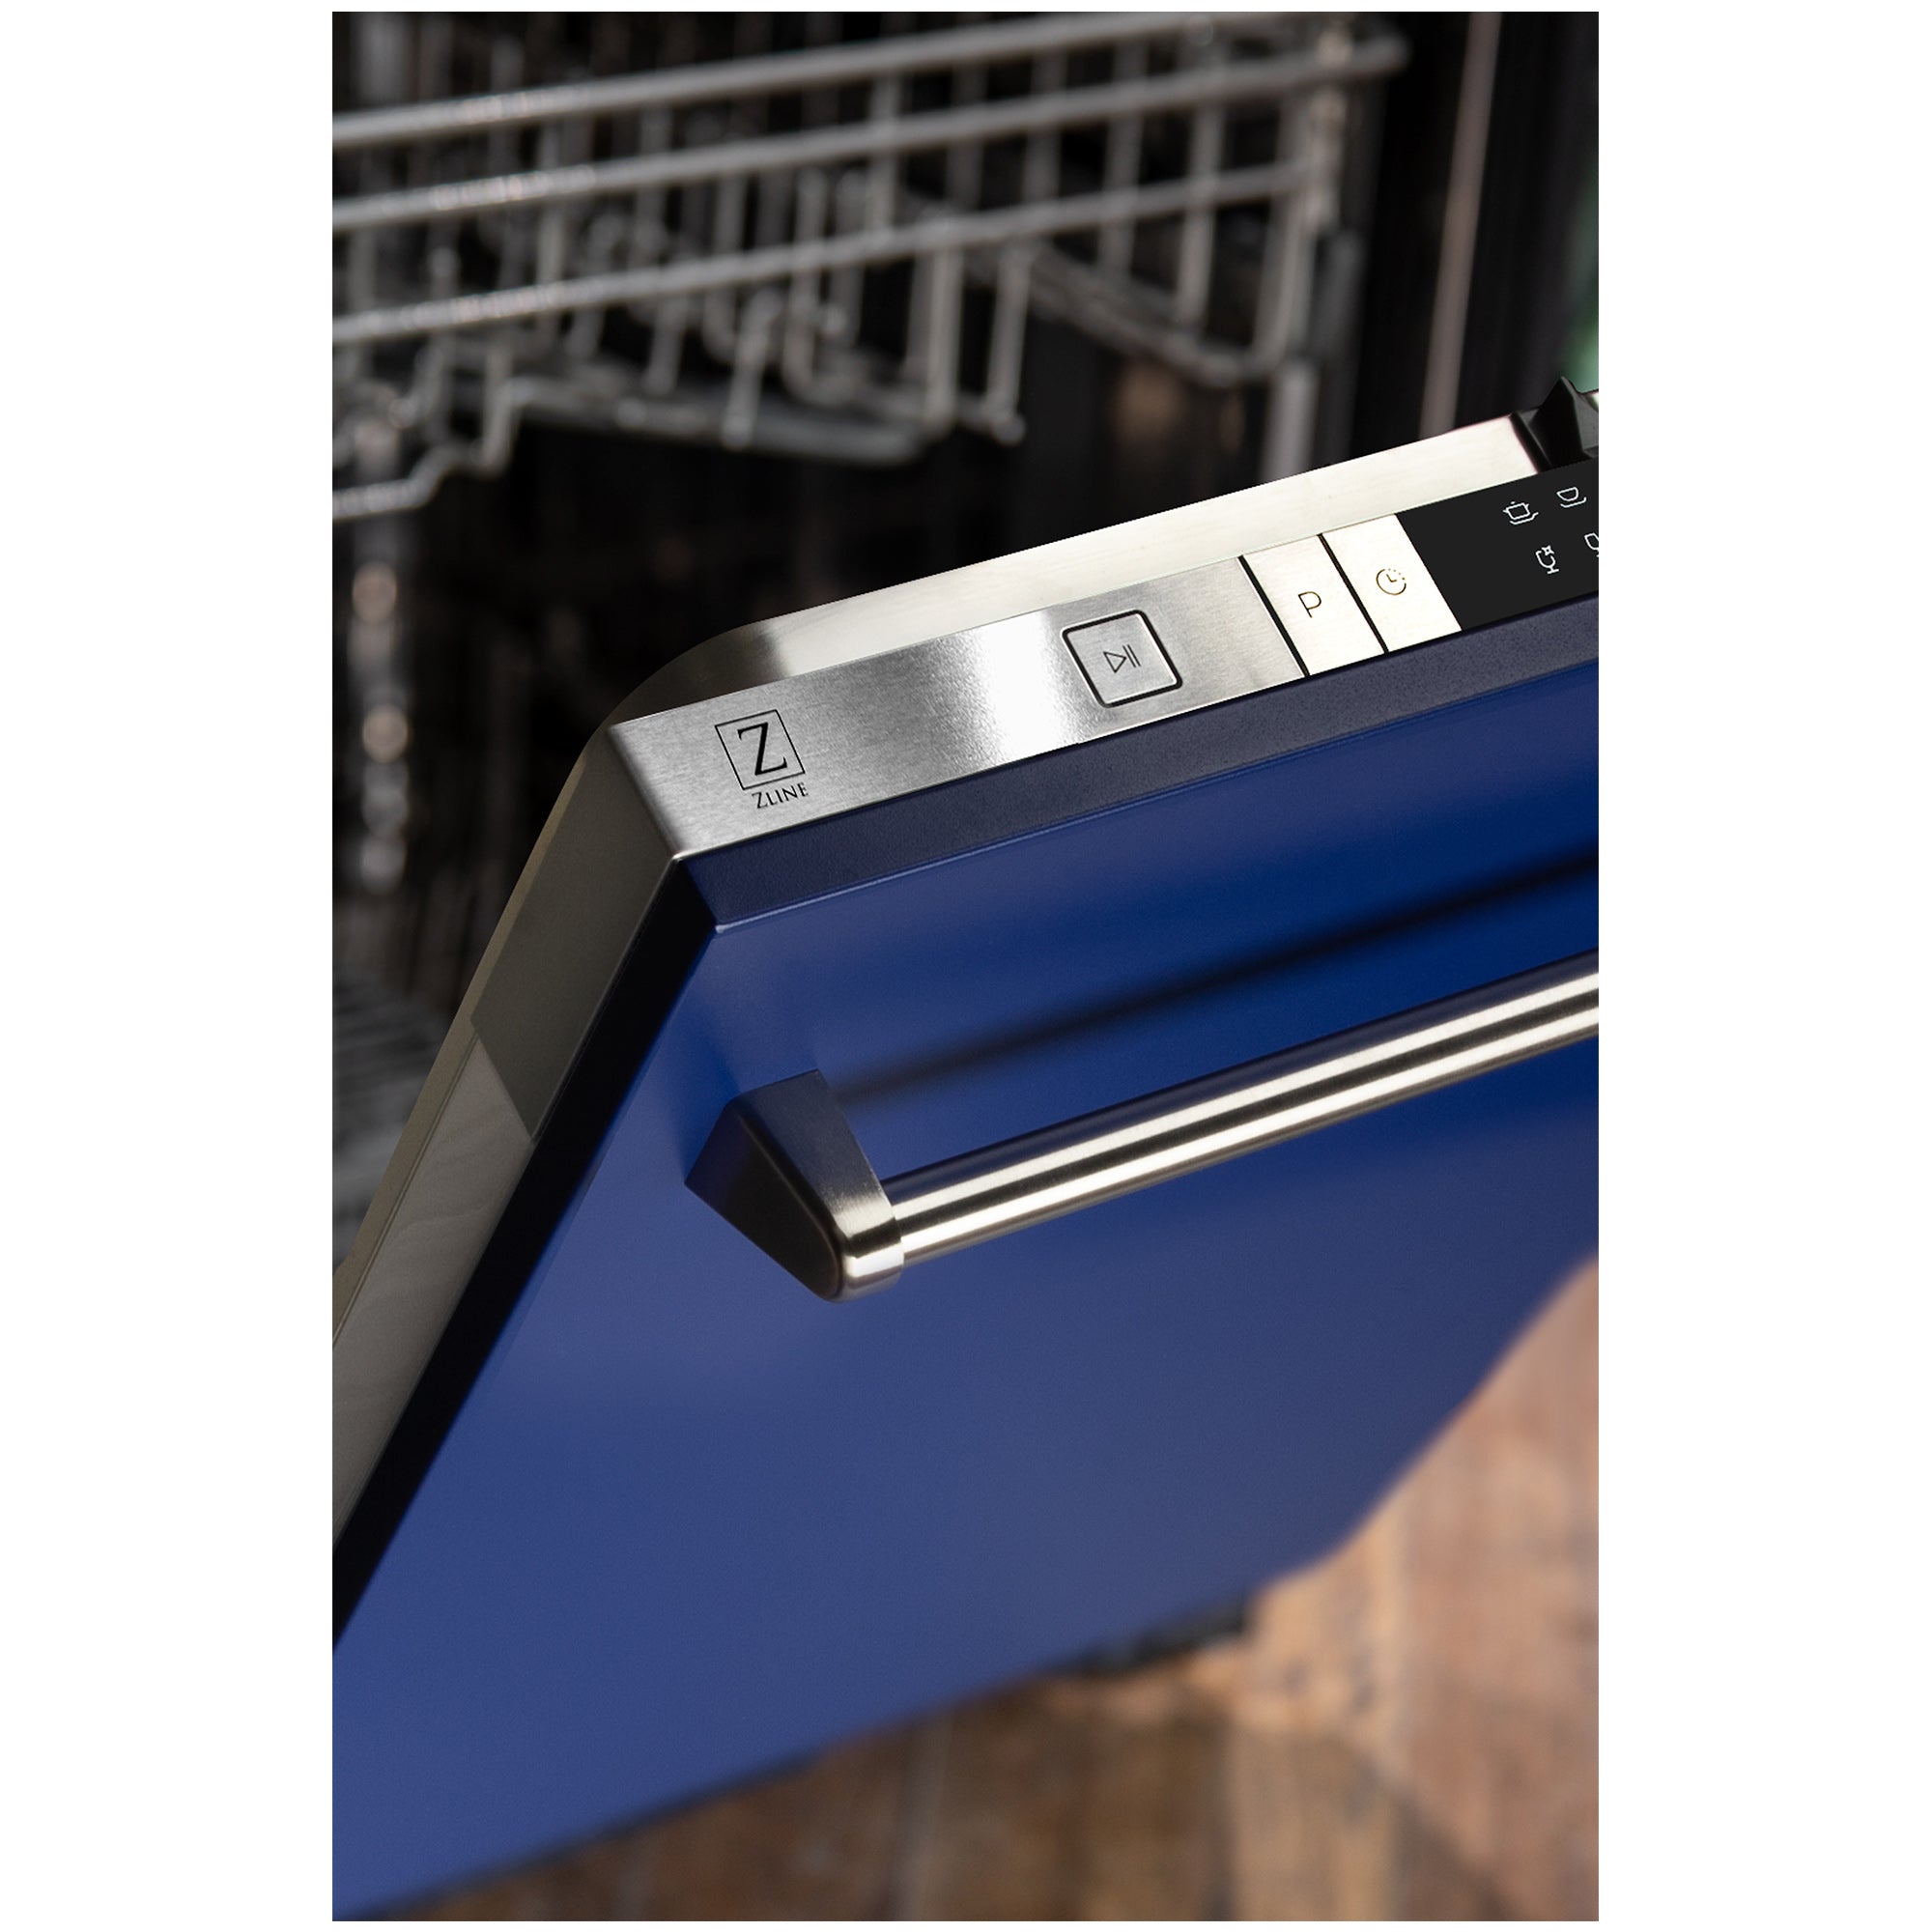 ZLINE 24 in. Blue Matte Top Control Built-In Dishwasher with Stainless Steel Tub and Traditional Style Handle, 52dBa